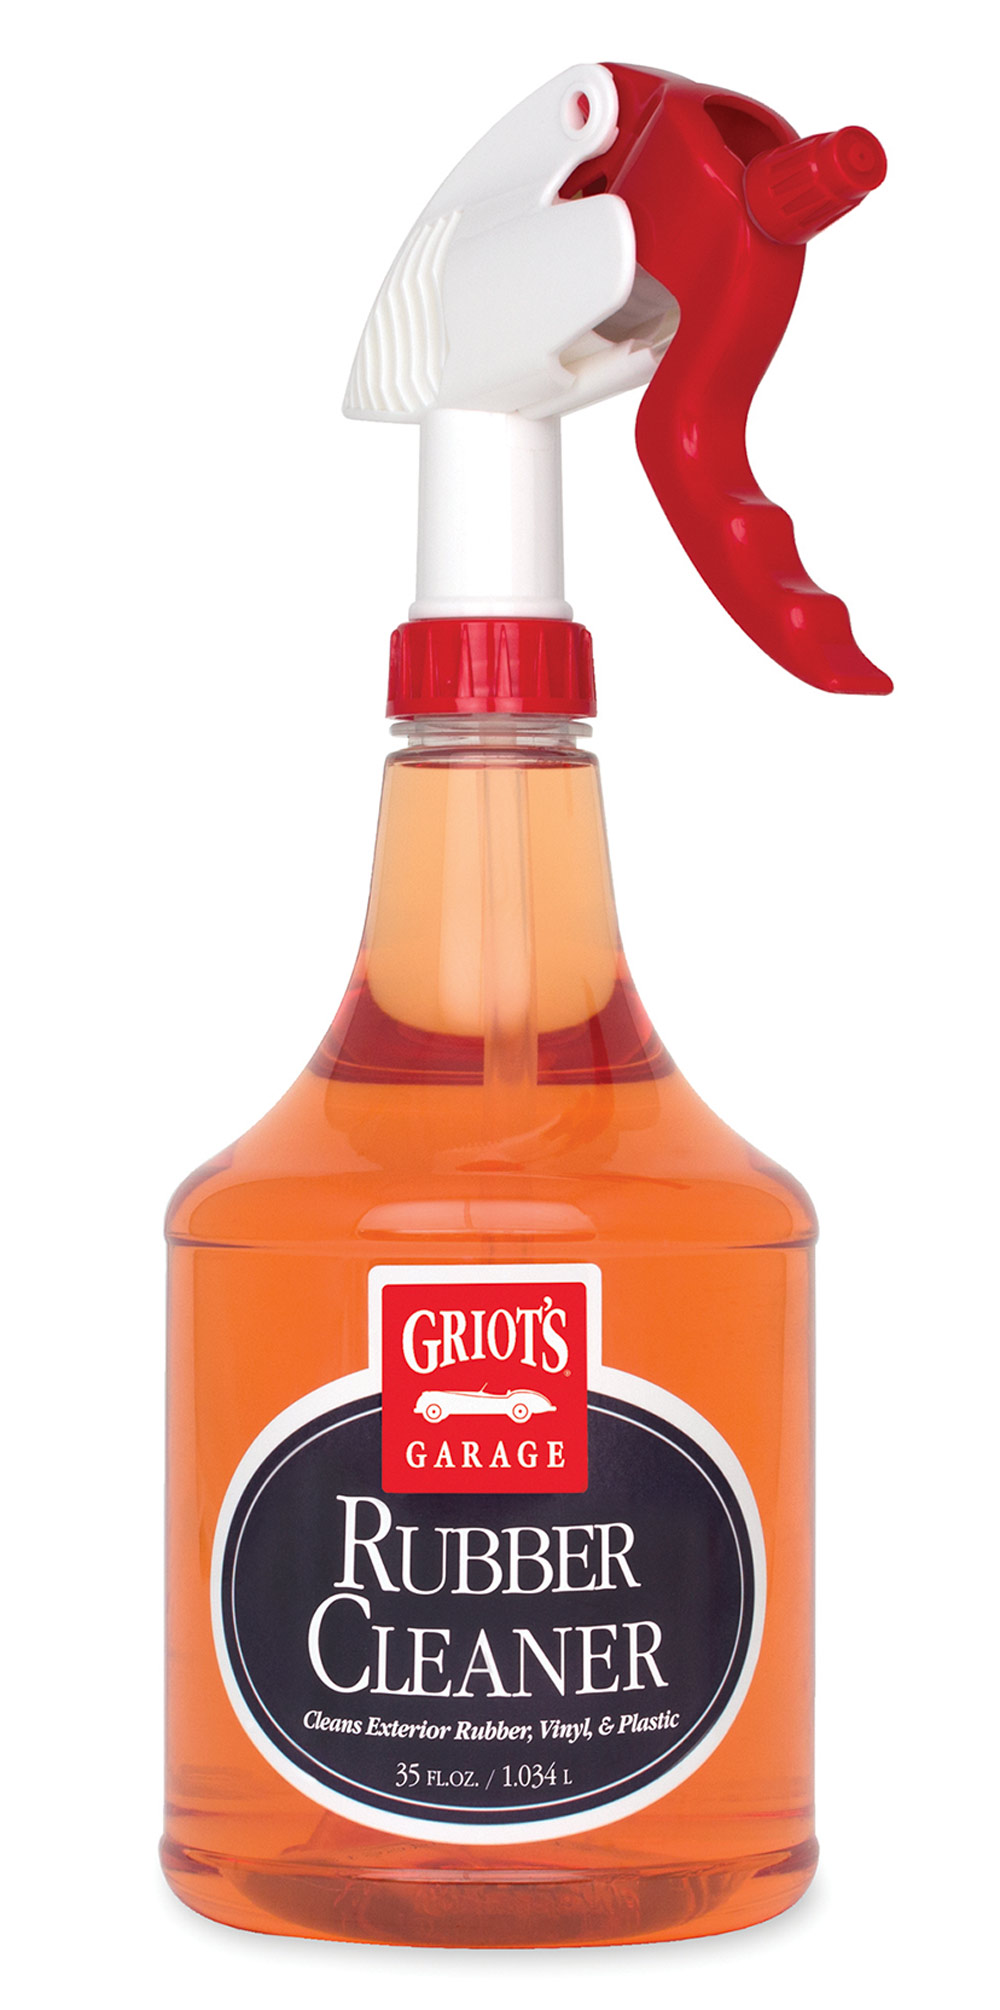 close view of a container of Griot’s Garage Rubber cleaner